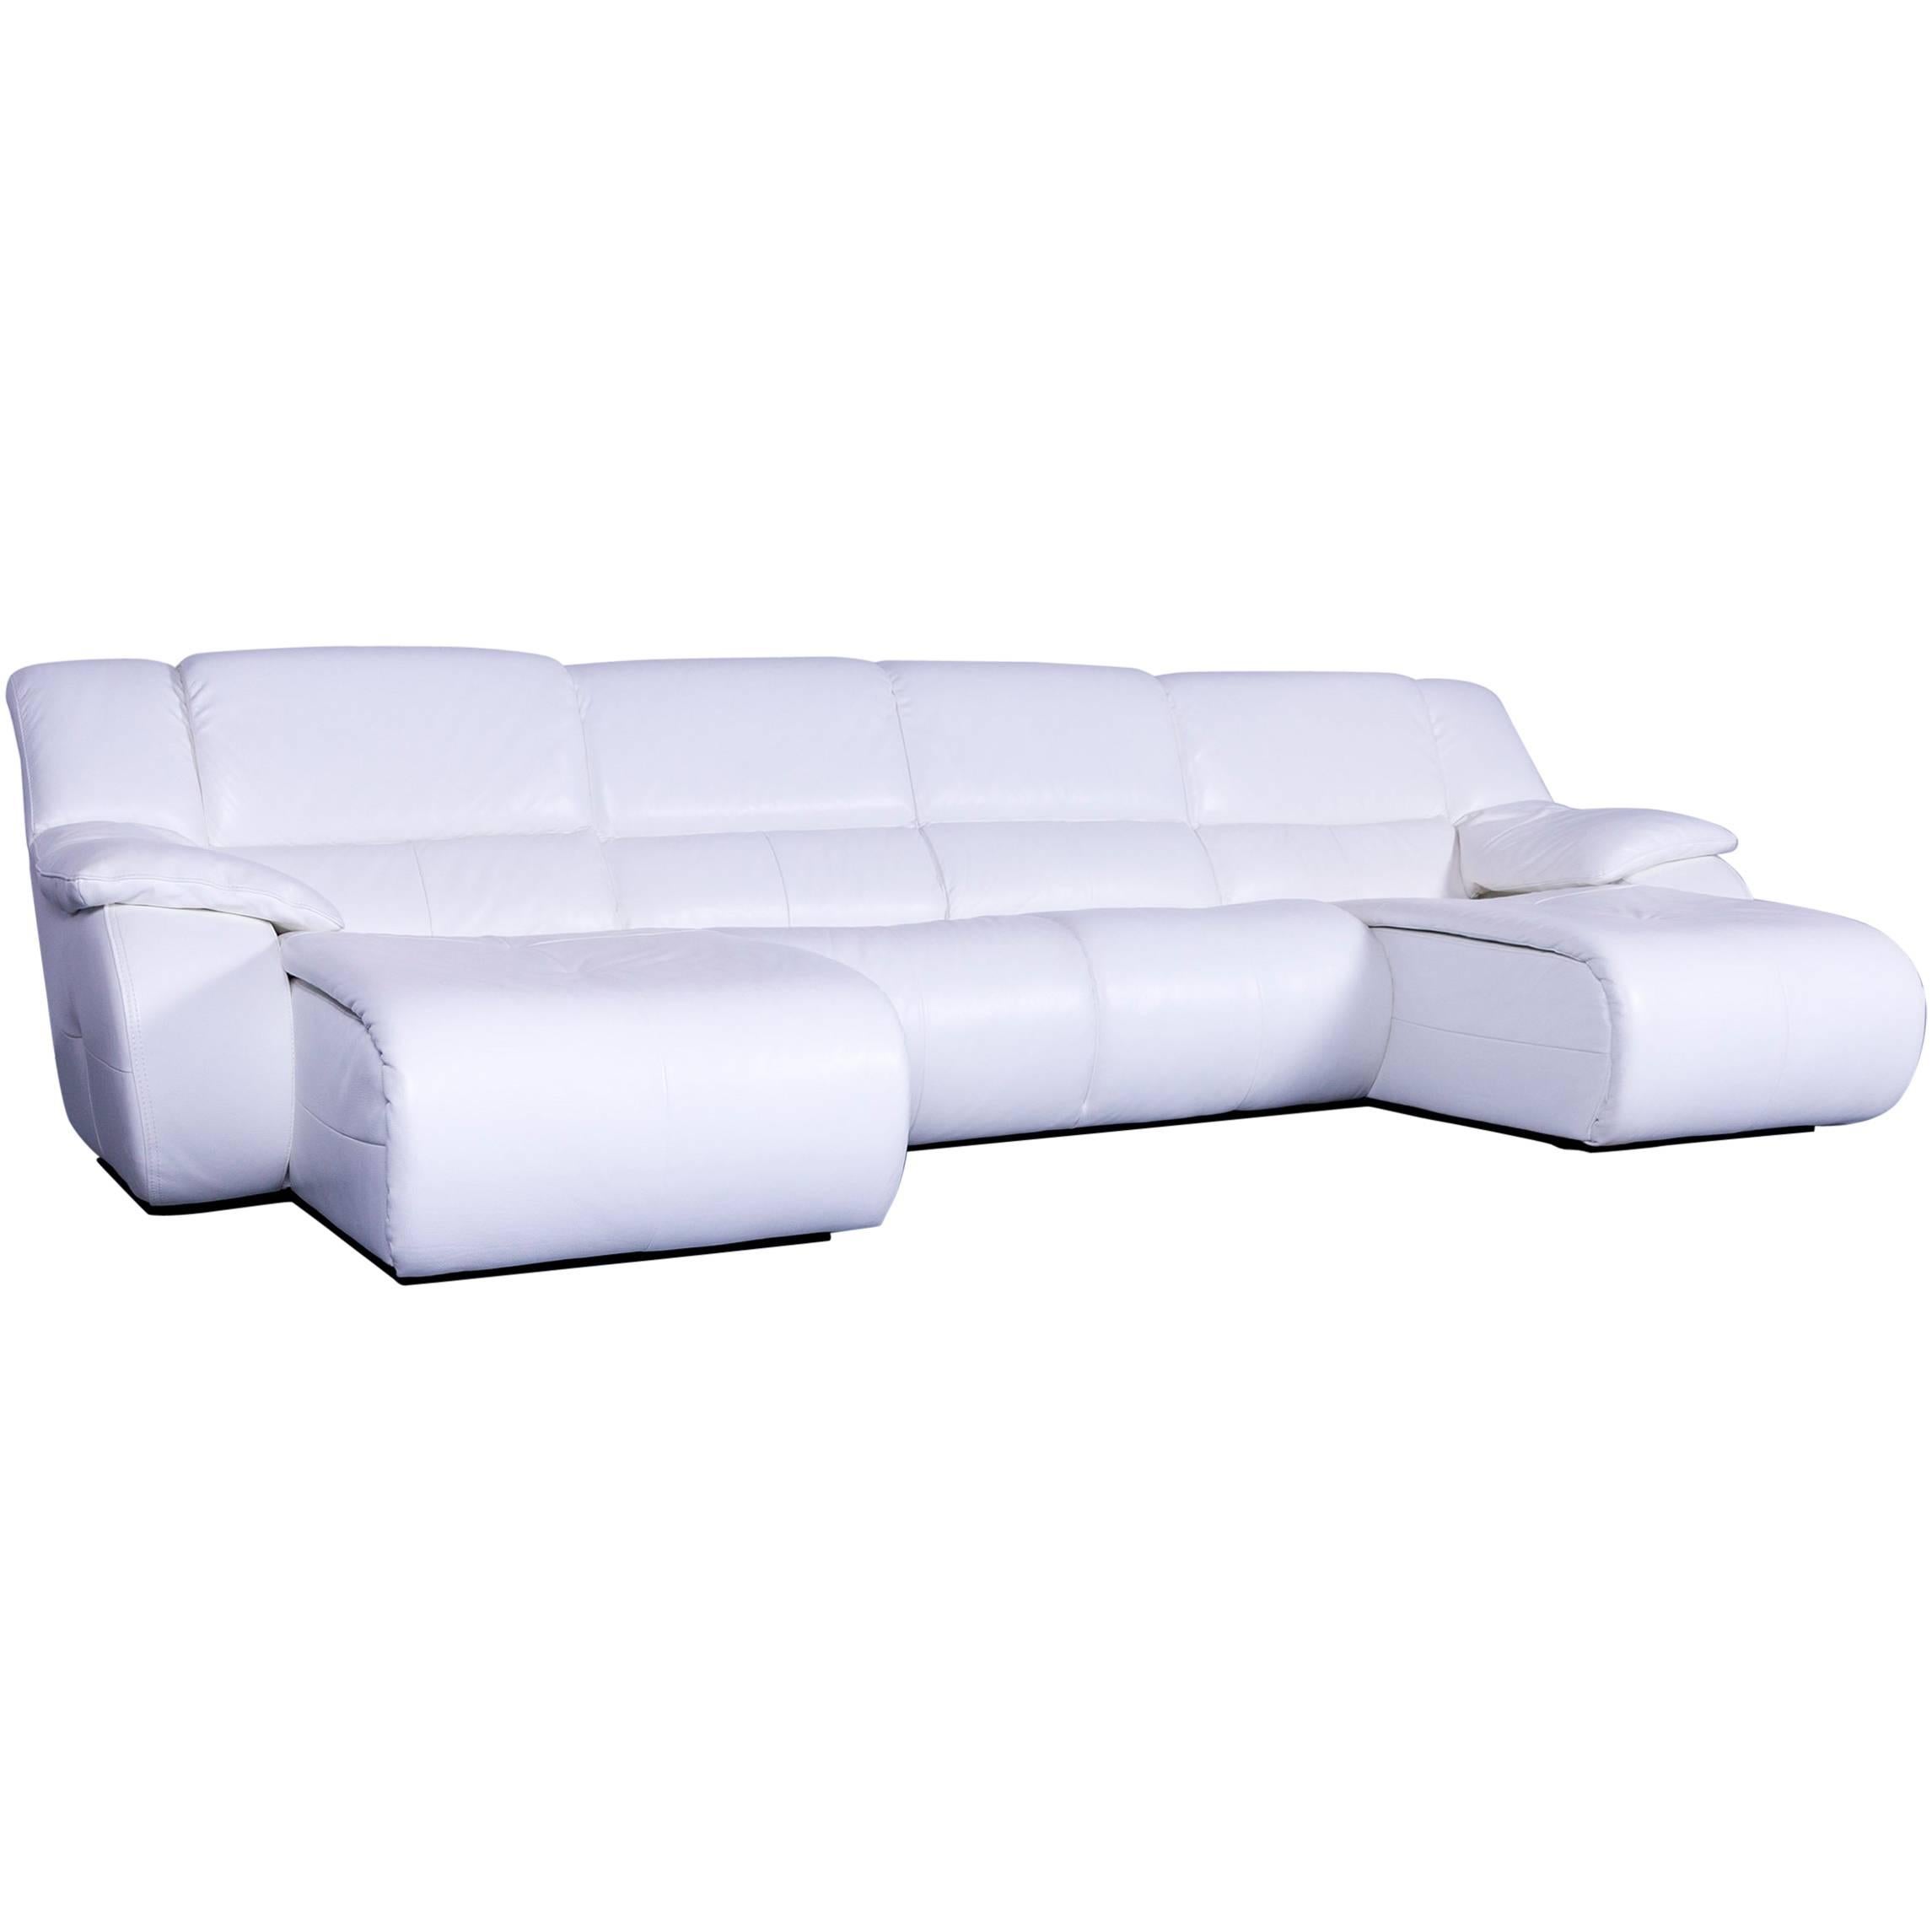 Chateau d`Ax Bamboo Leather Corner-Sofa White Electric Recliner